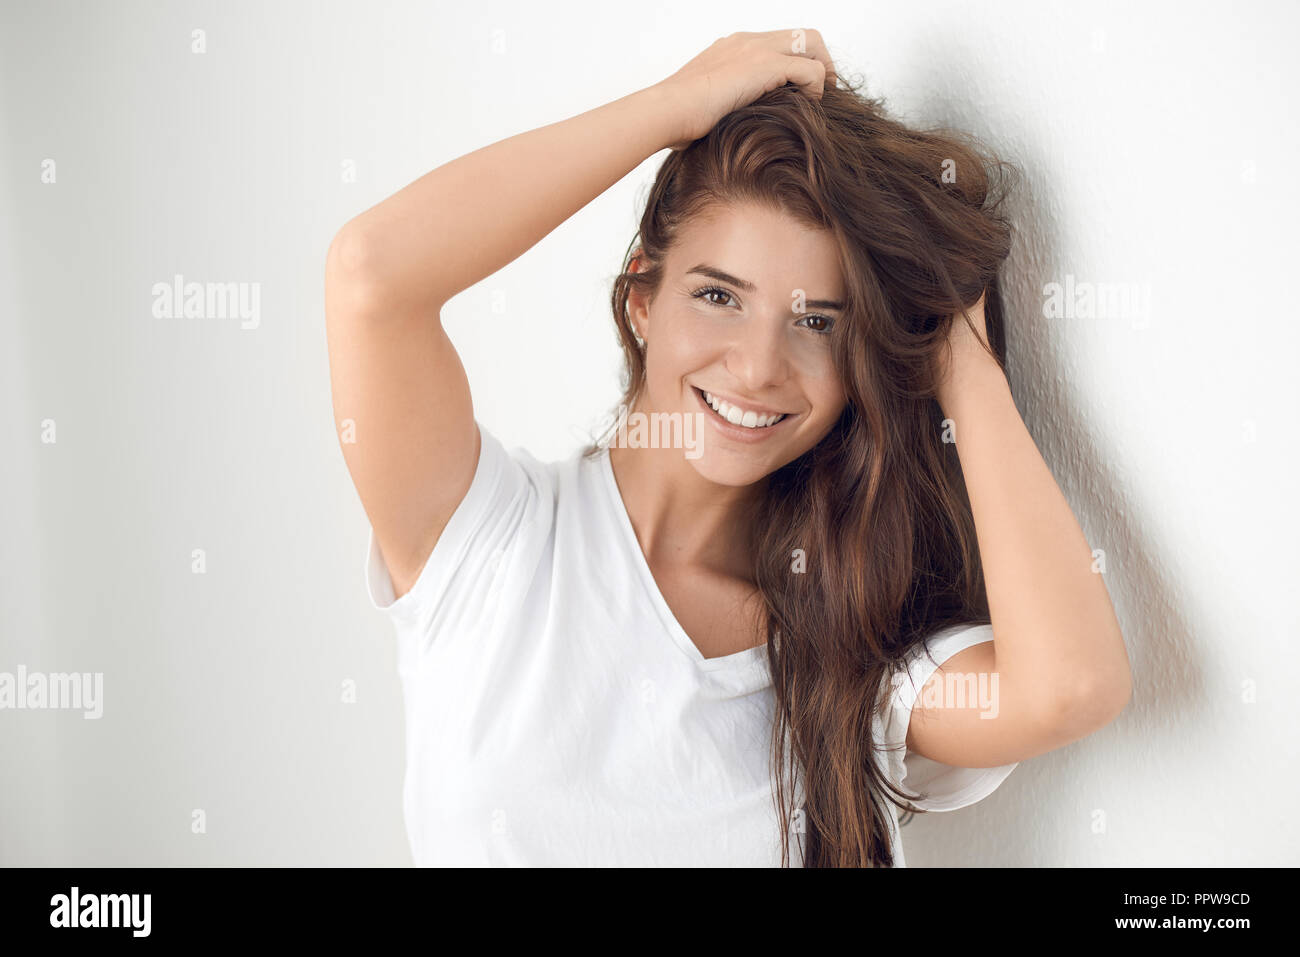 Young smiling playful blond woman holding her hair while leaning against white wall Stock Photo